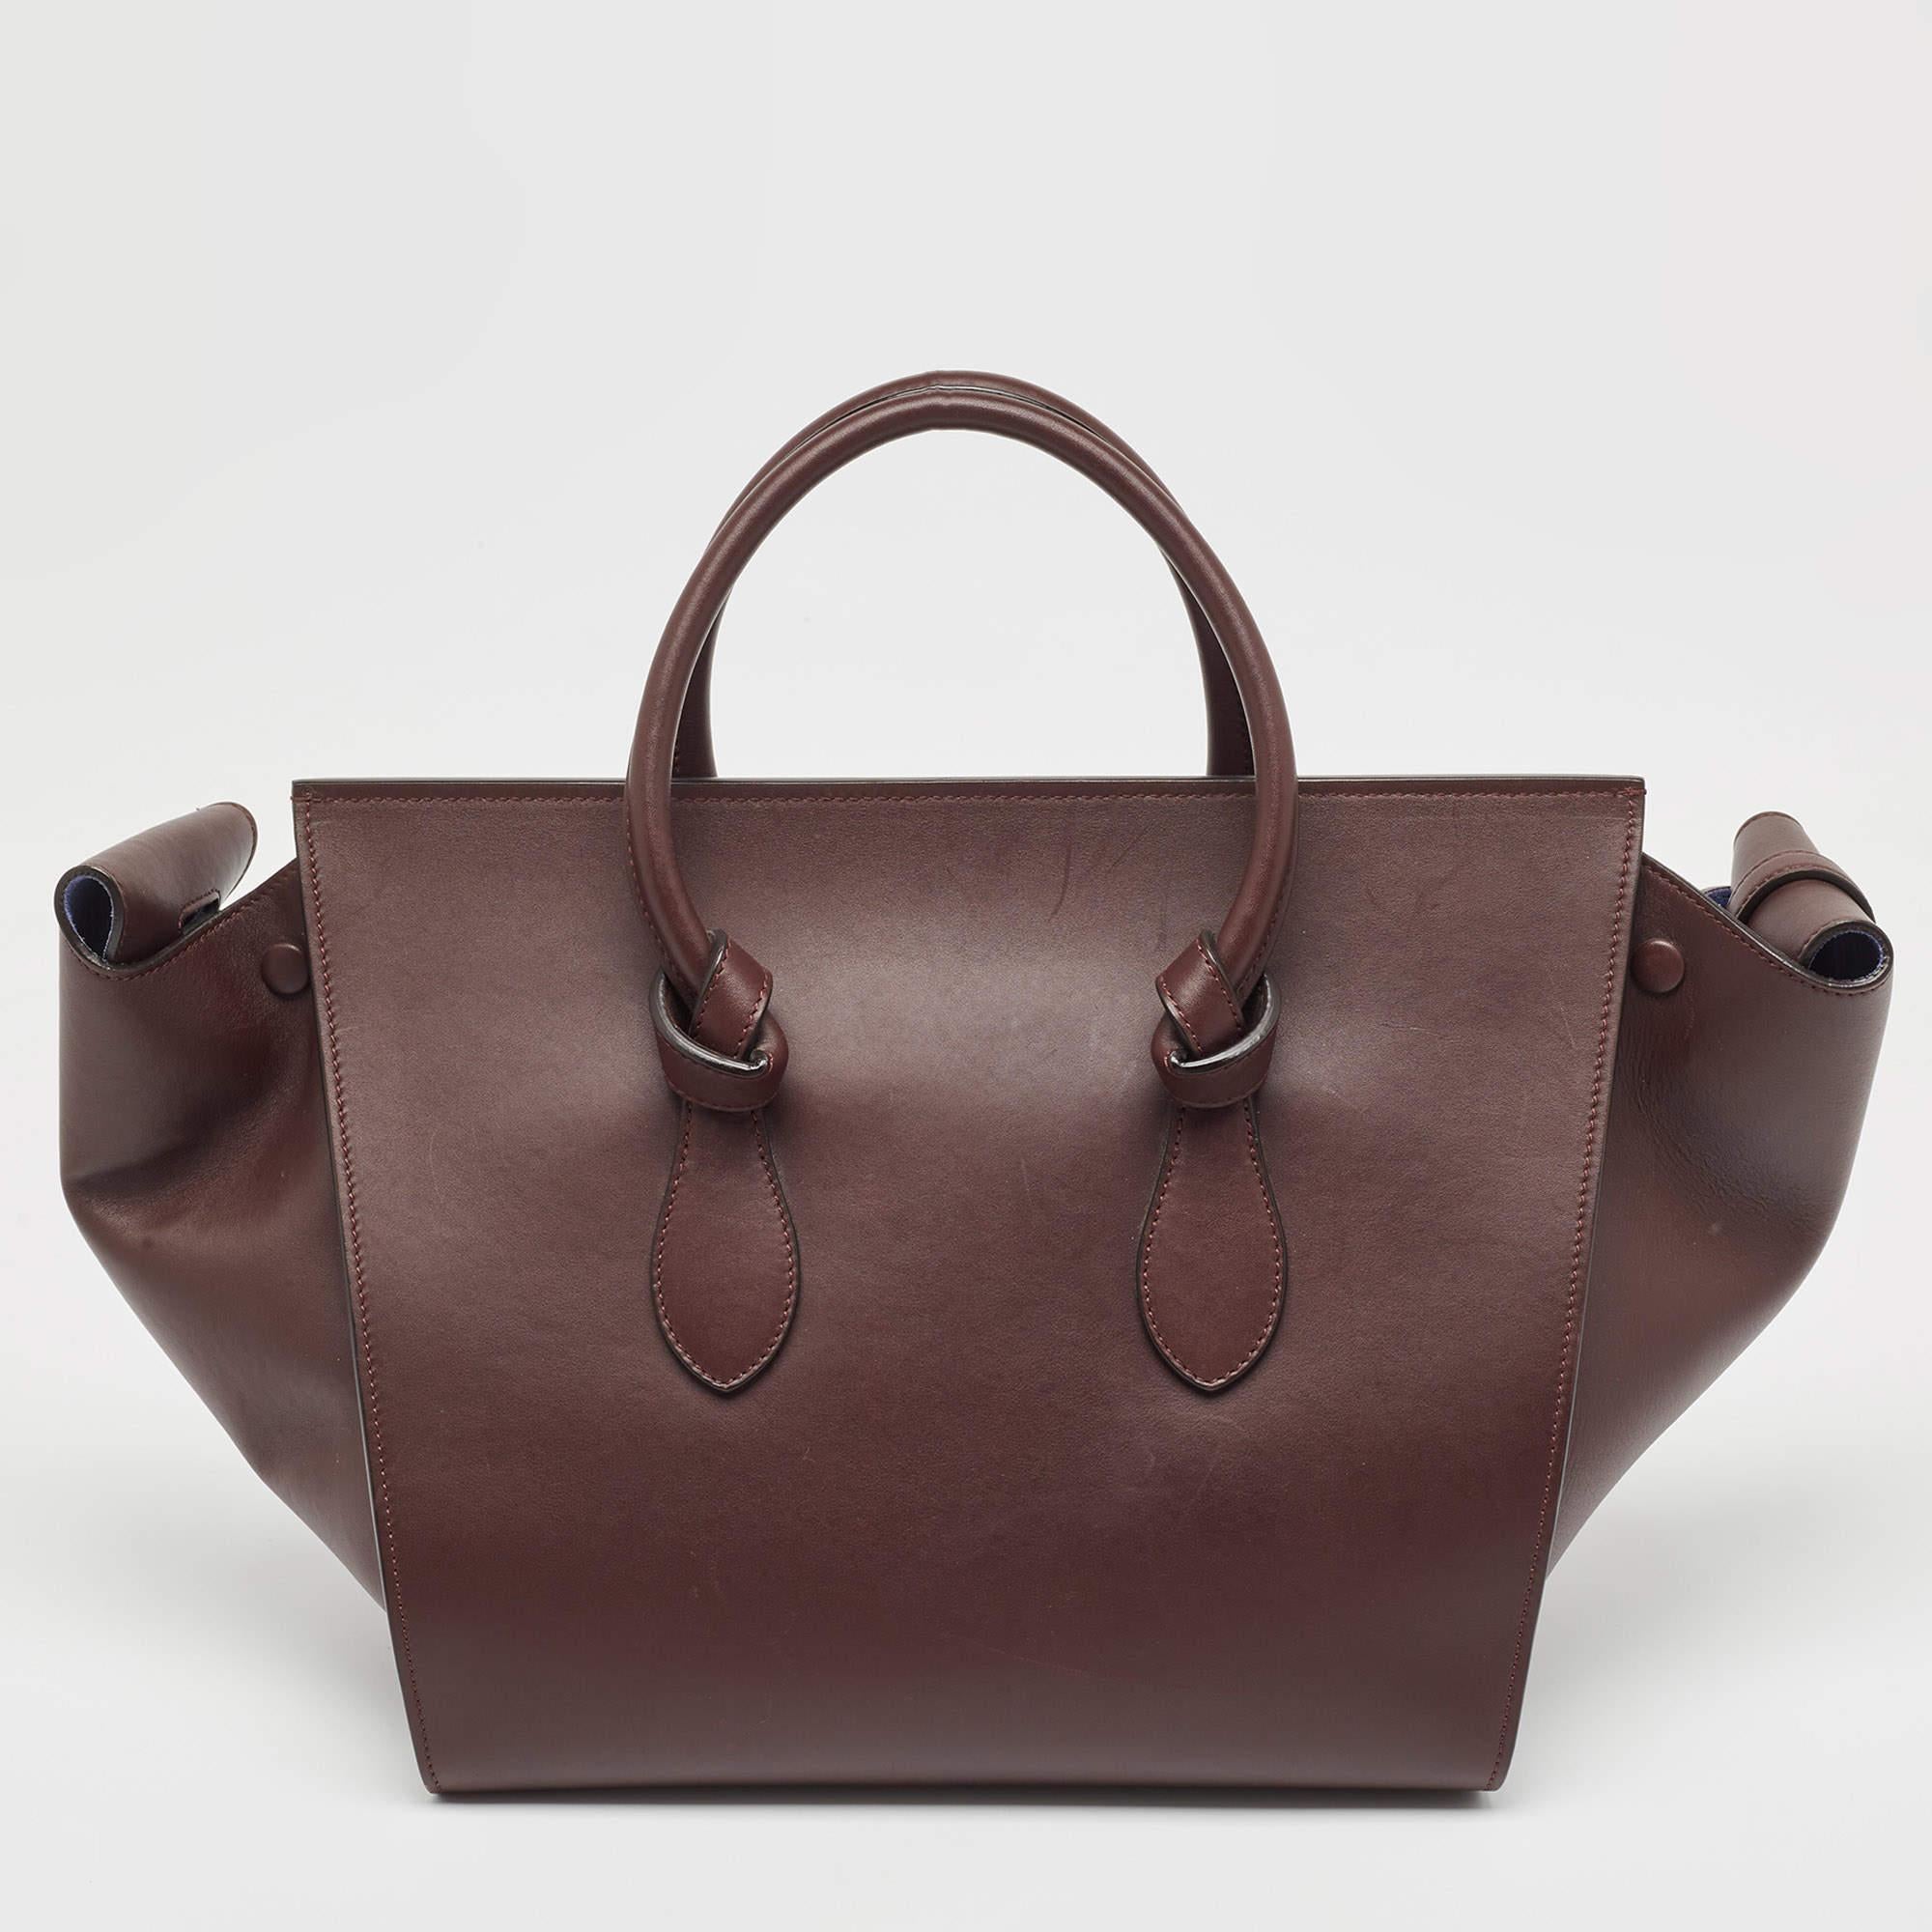 The architectural shape of this tote makes it distinct and fashionable. Made from premium materials, it can be carried around conveniently and it is equipped with a perfectly-sized interior.

